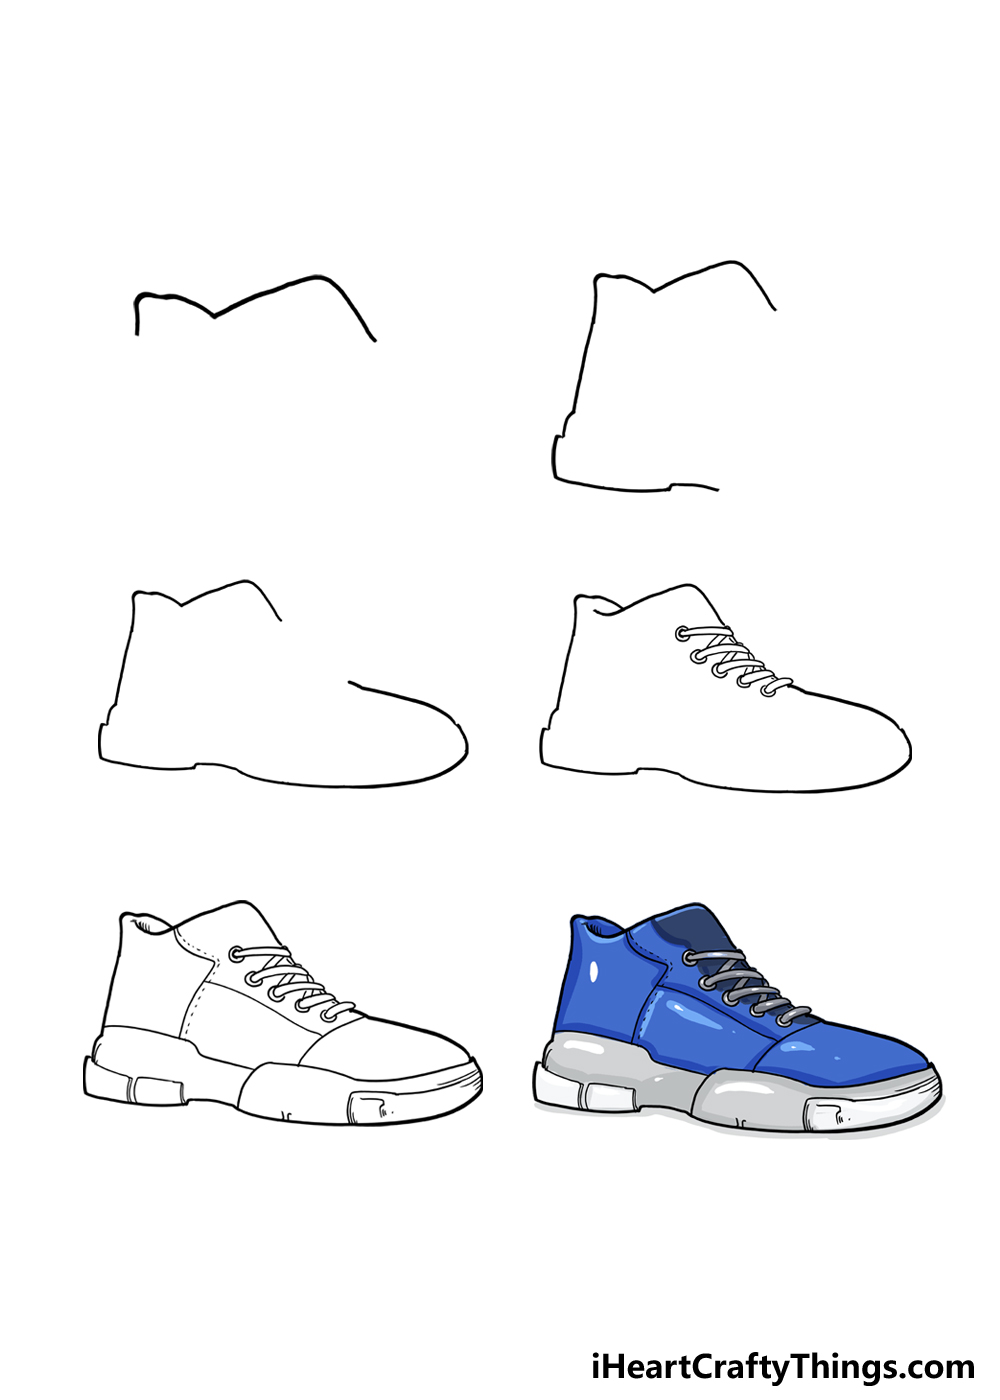 How to Draw A Shoe